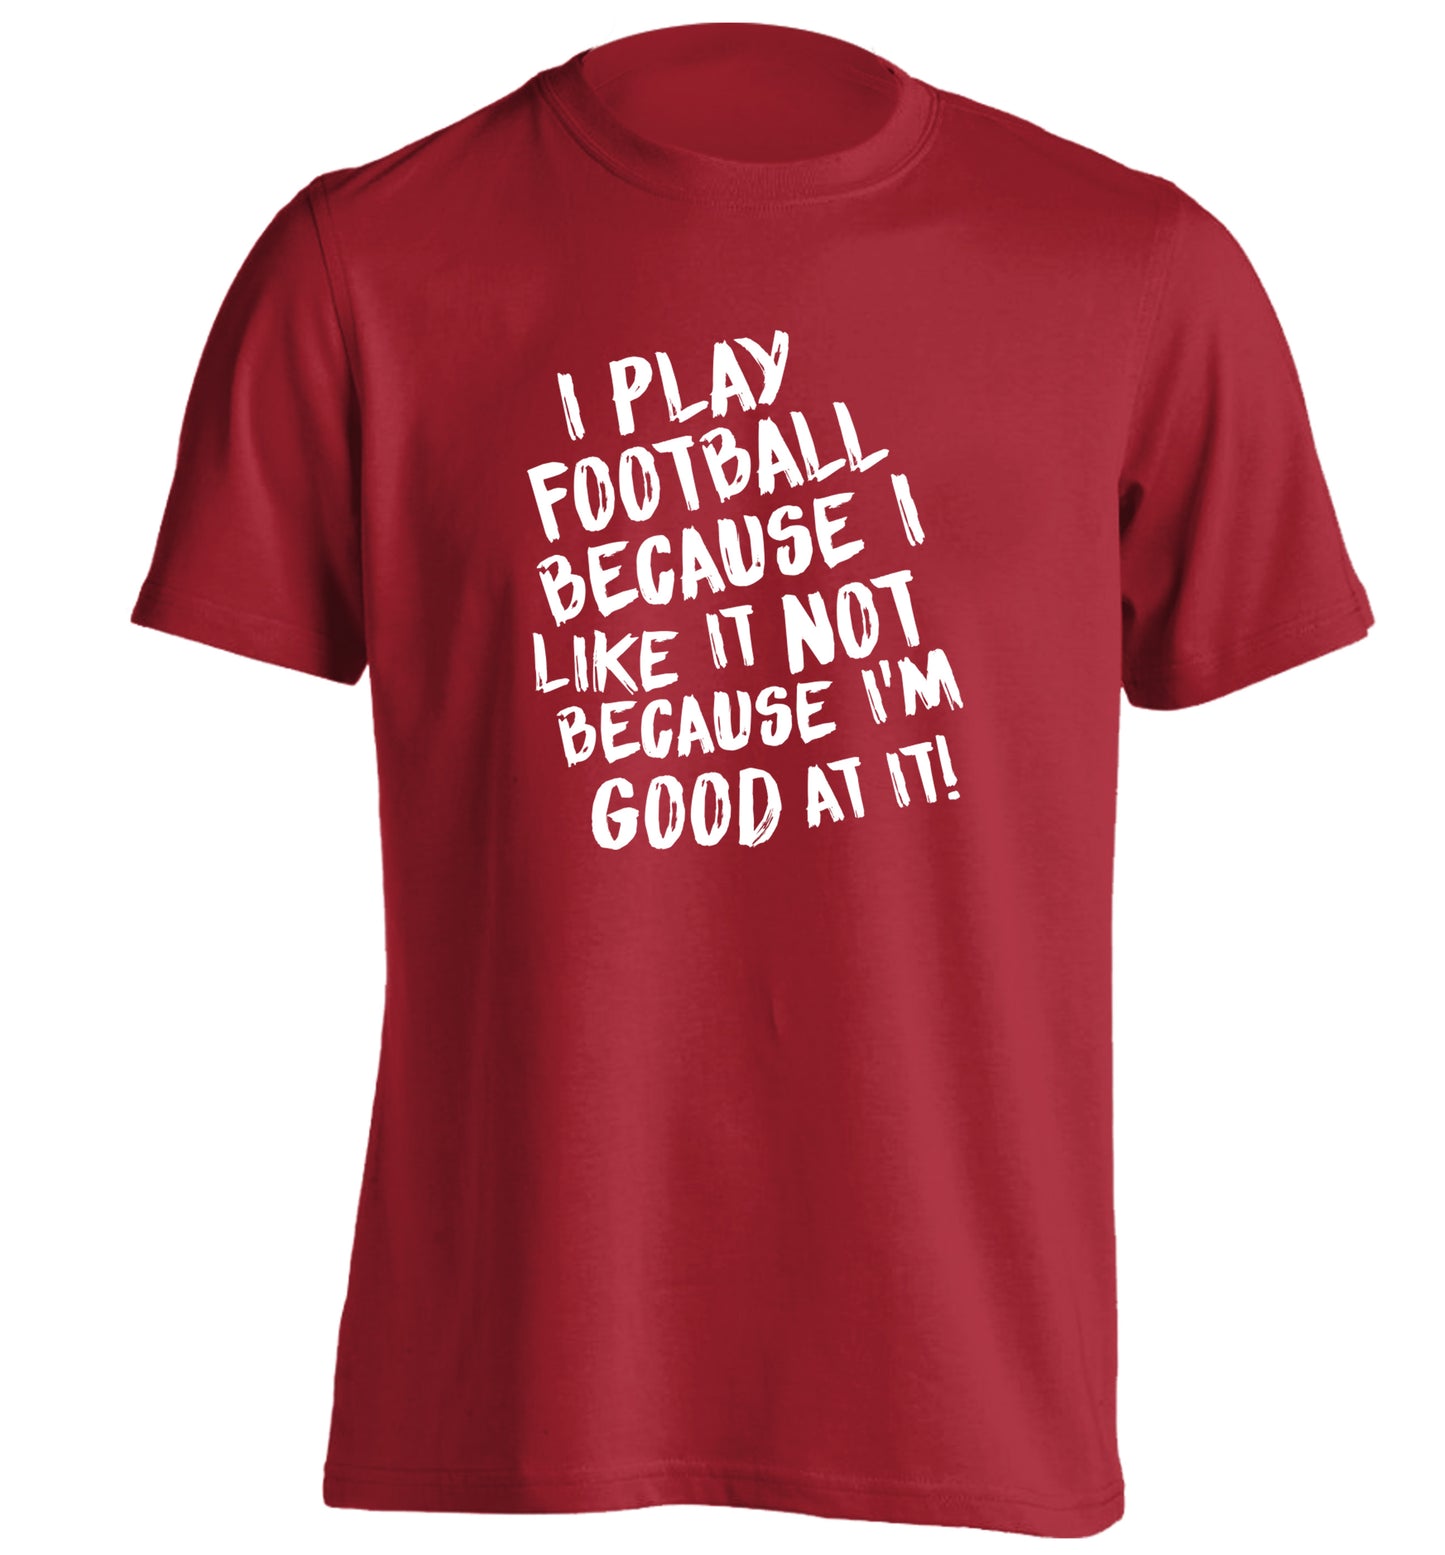 I play football because I like it not because I'm good at it adults unisexred Tshirt 2XL